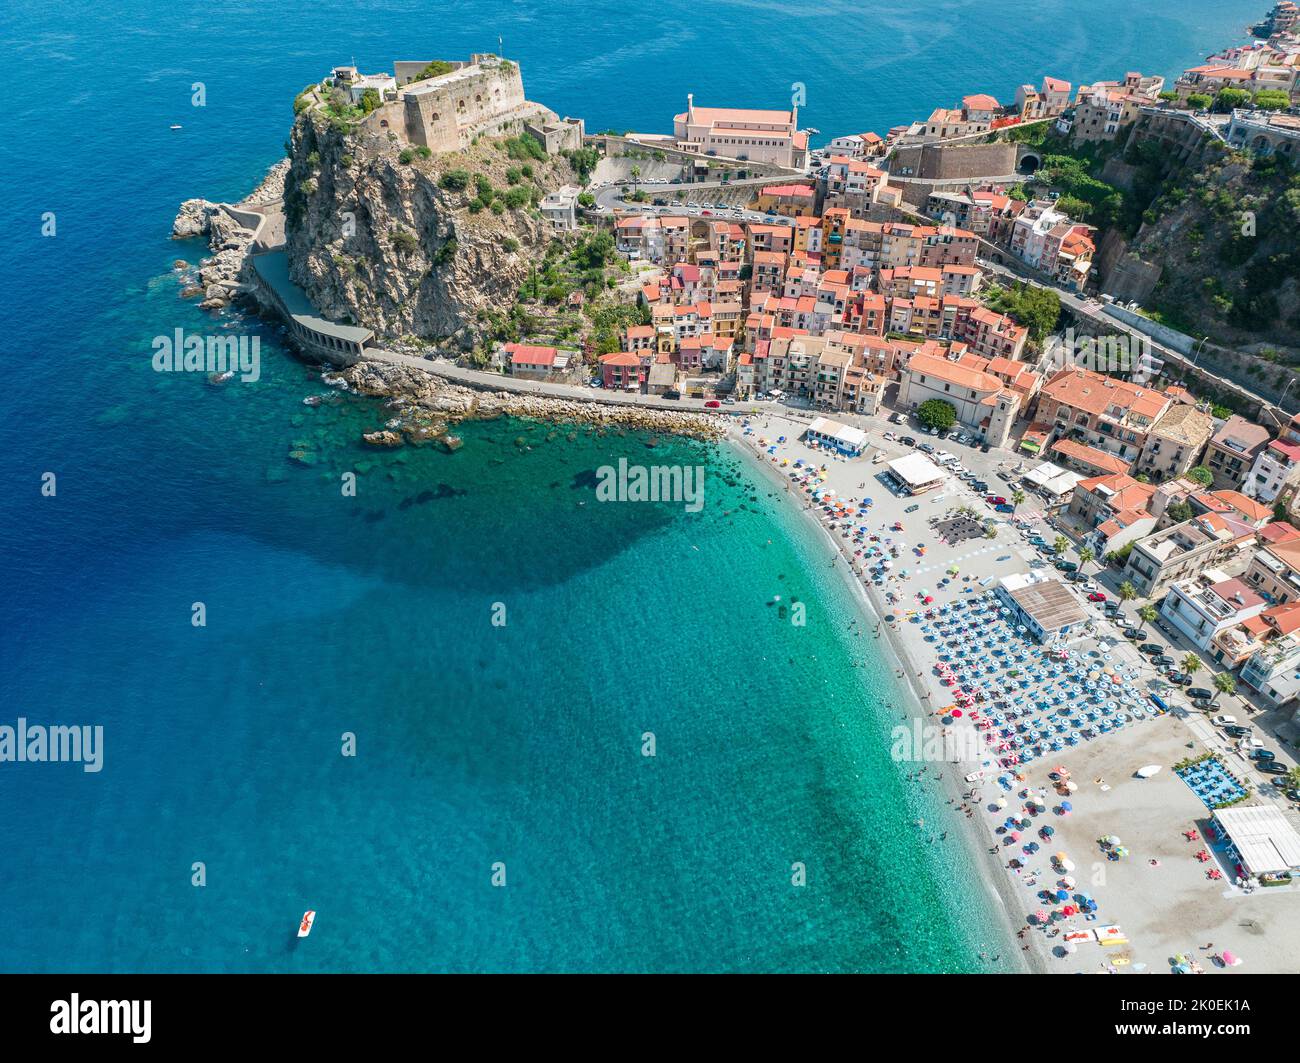 Aerial view of Scilla, Reggio Calabria, Calabria. Promontory at the northern entrance of the Strait of Messina. Ruffo Castle and lighthouse Stock Photo